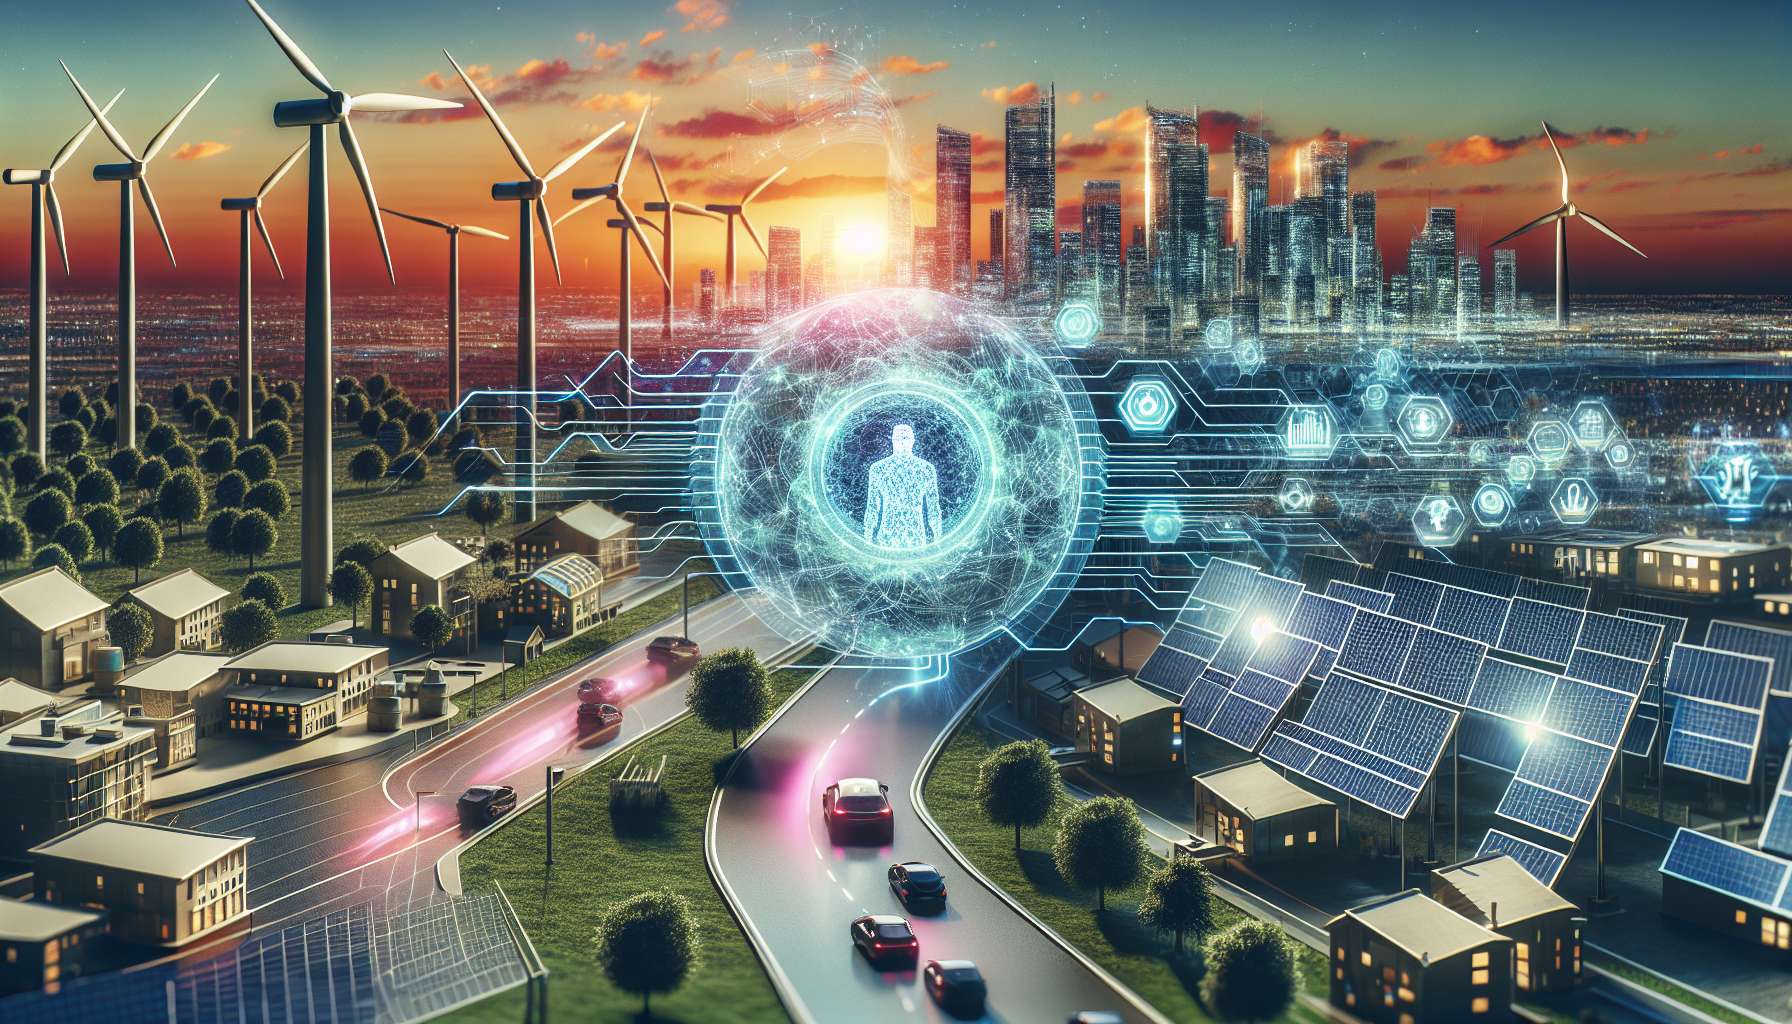 Conceptual illustration of sustainable energy and AI integration